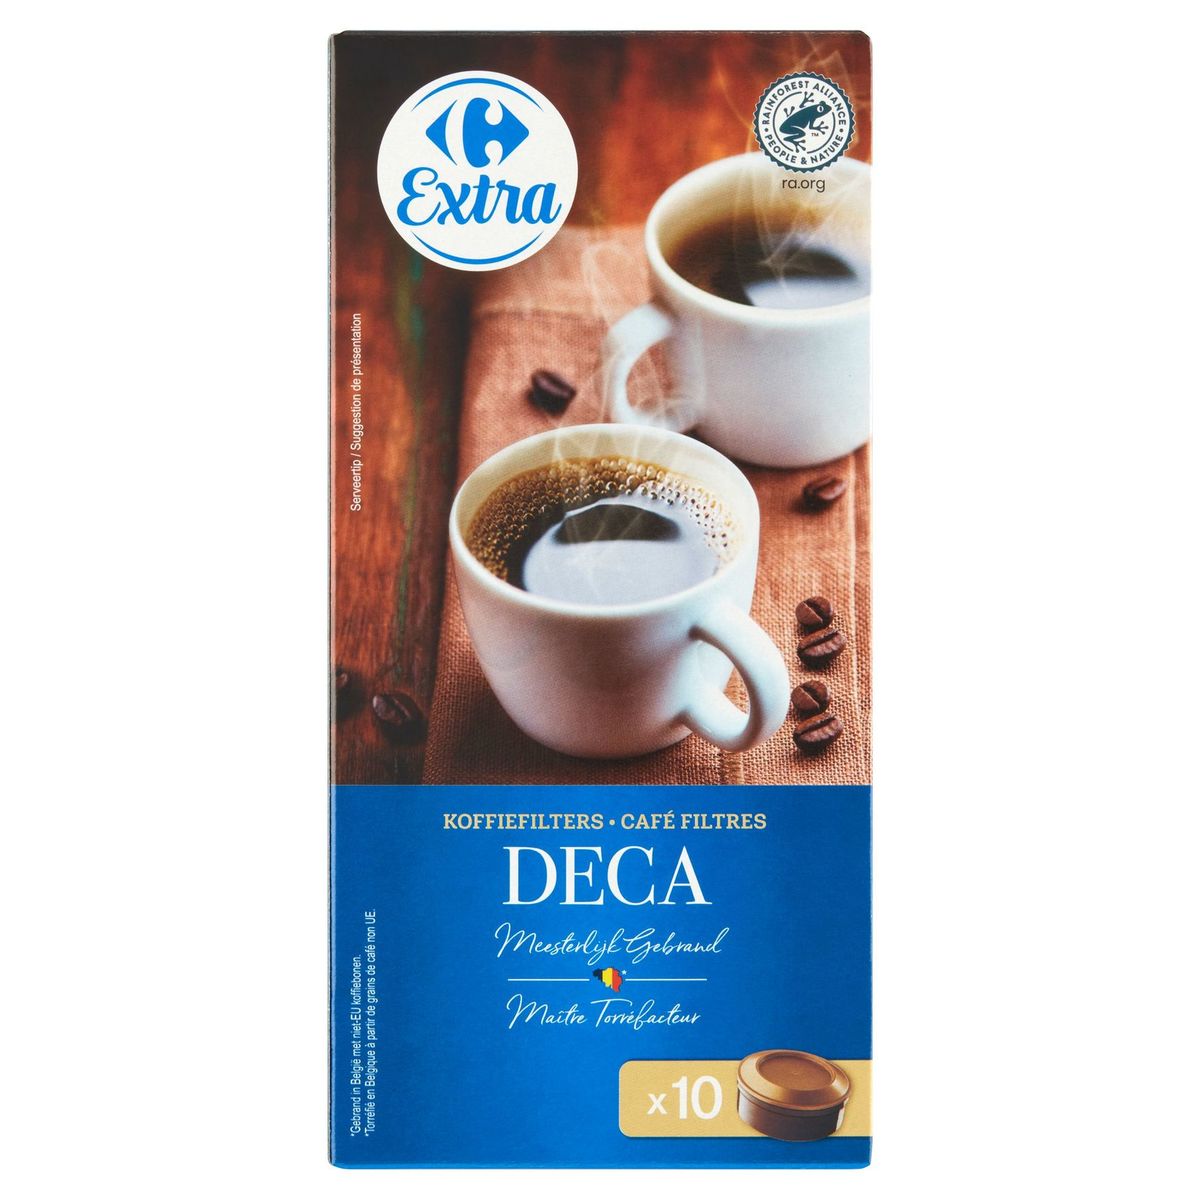 Carrefour Extra Koffiefilters Deca10 Stuks 75 g